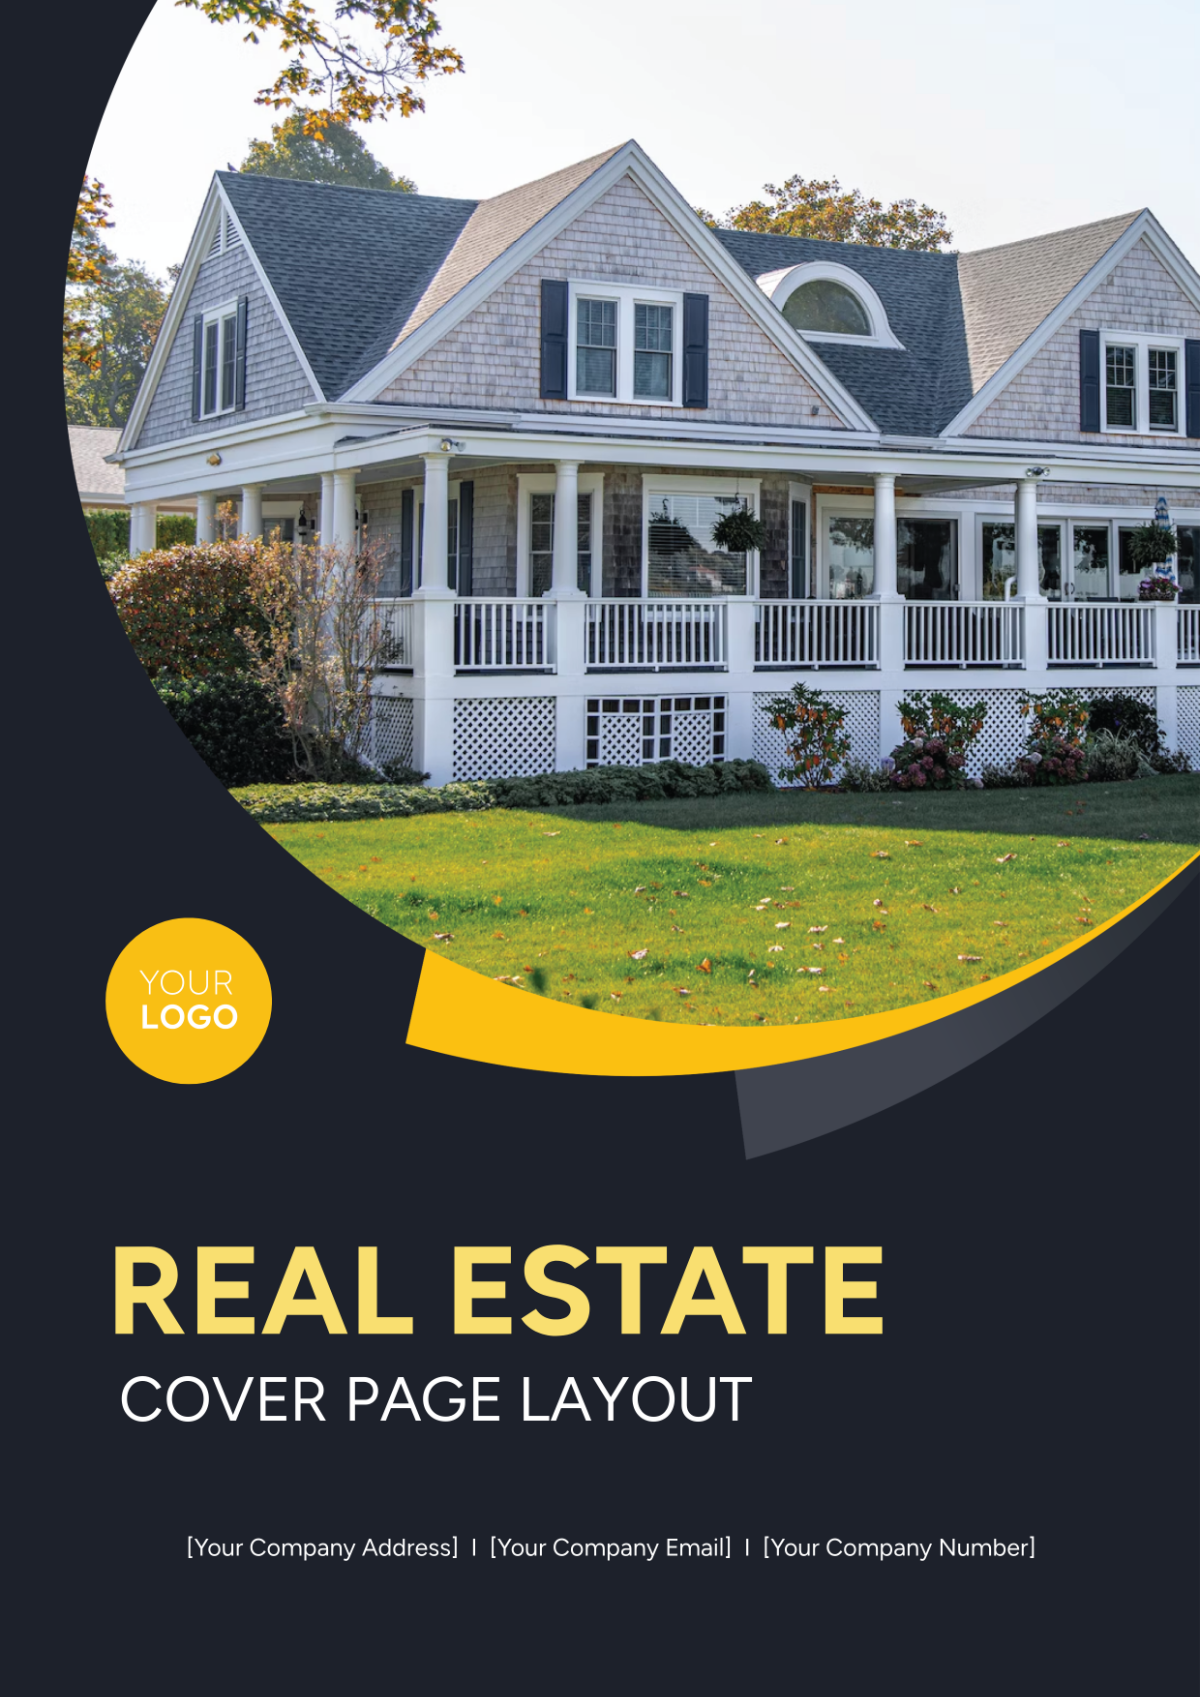 Real Estate Cover Page Layout